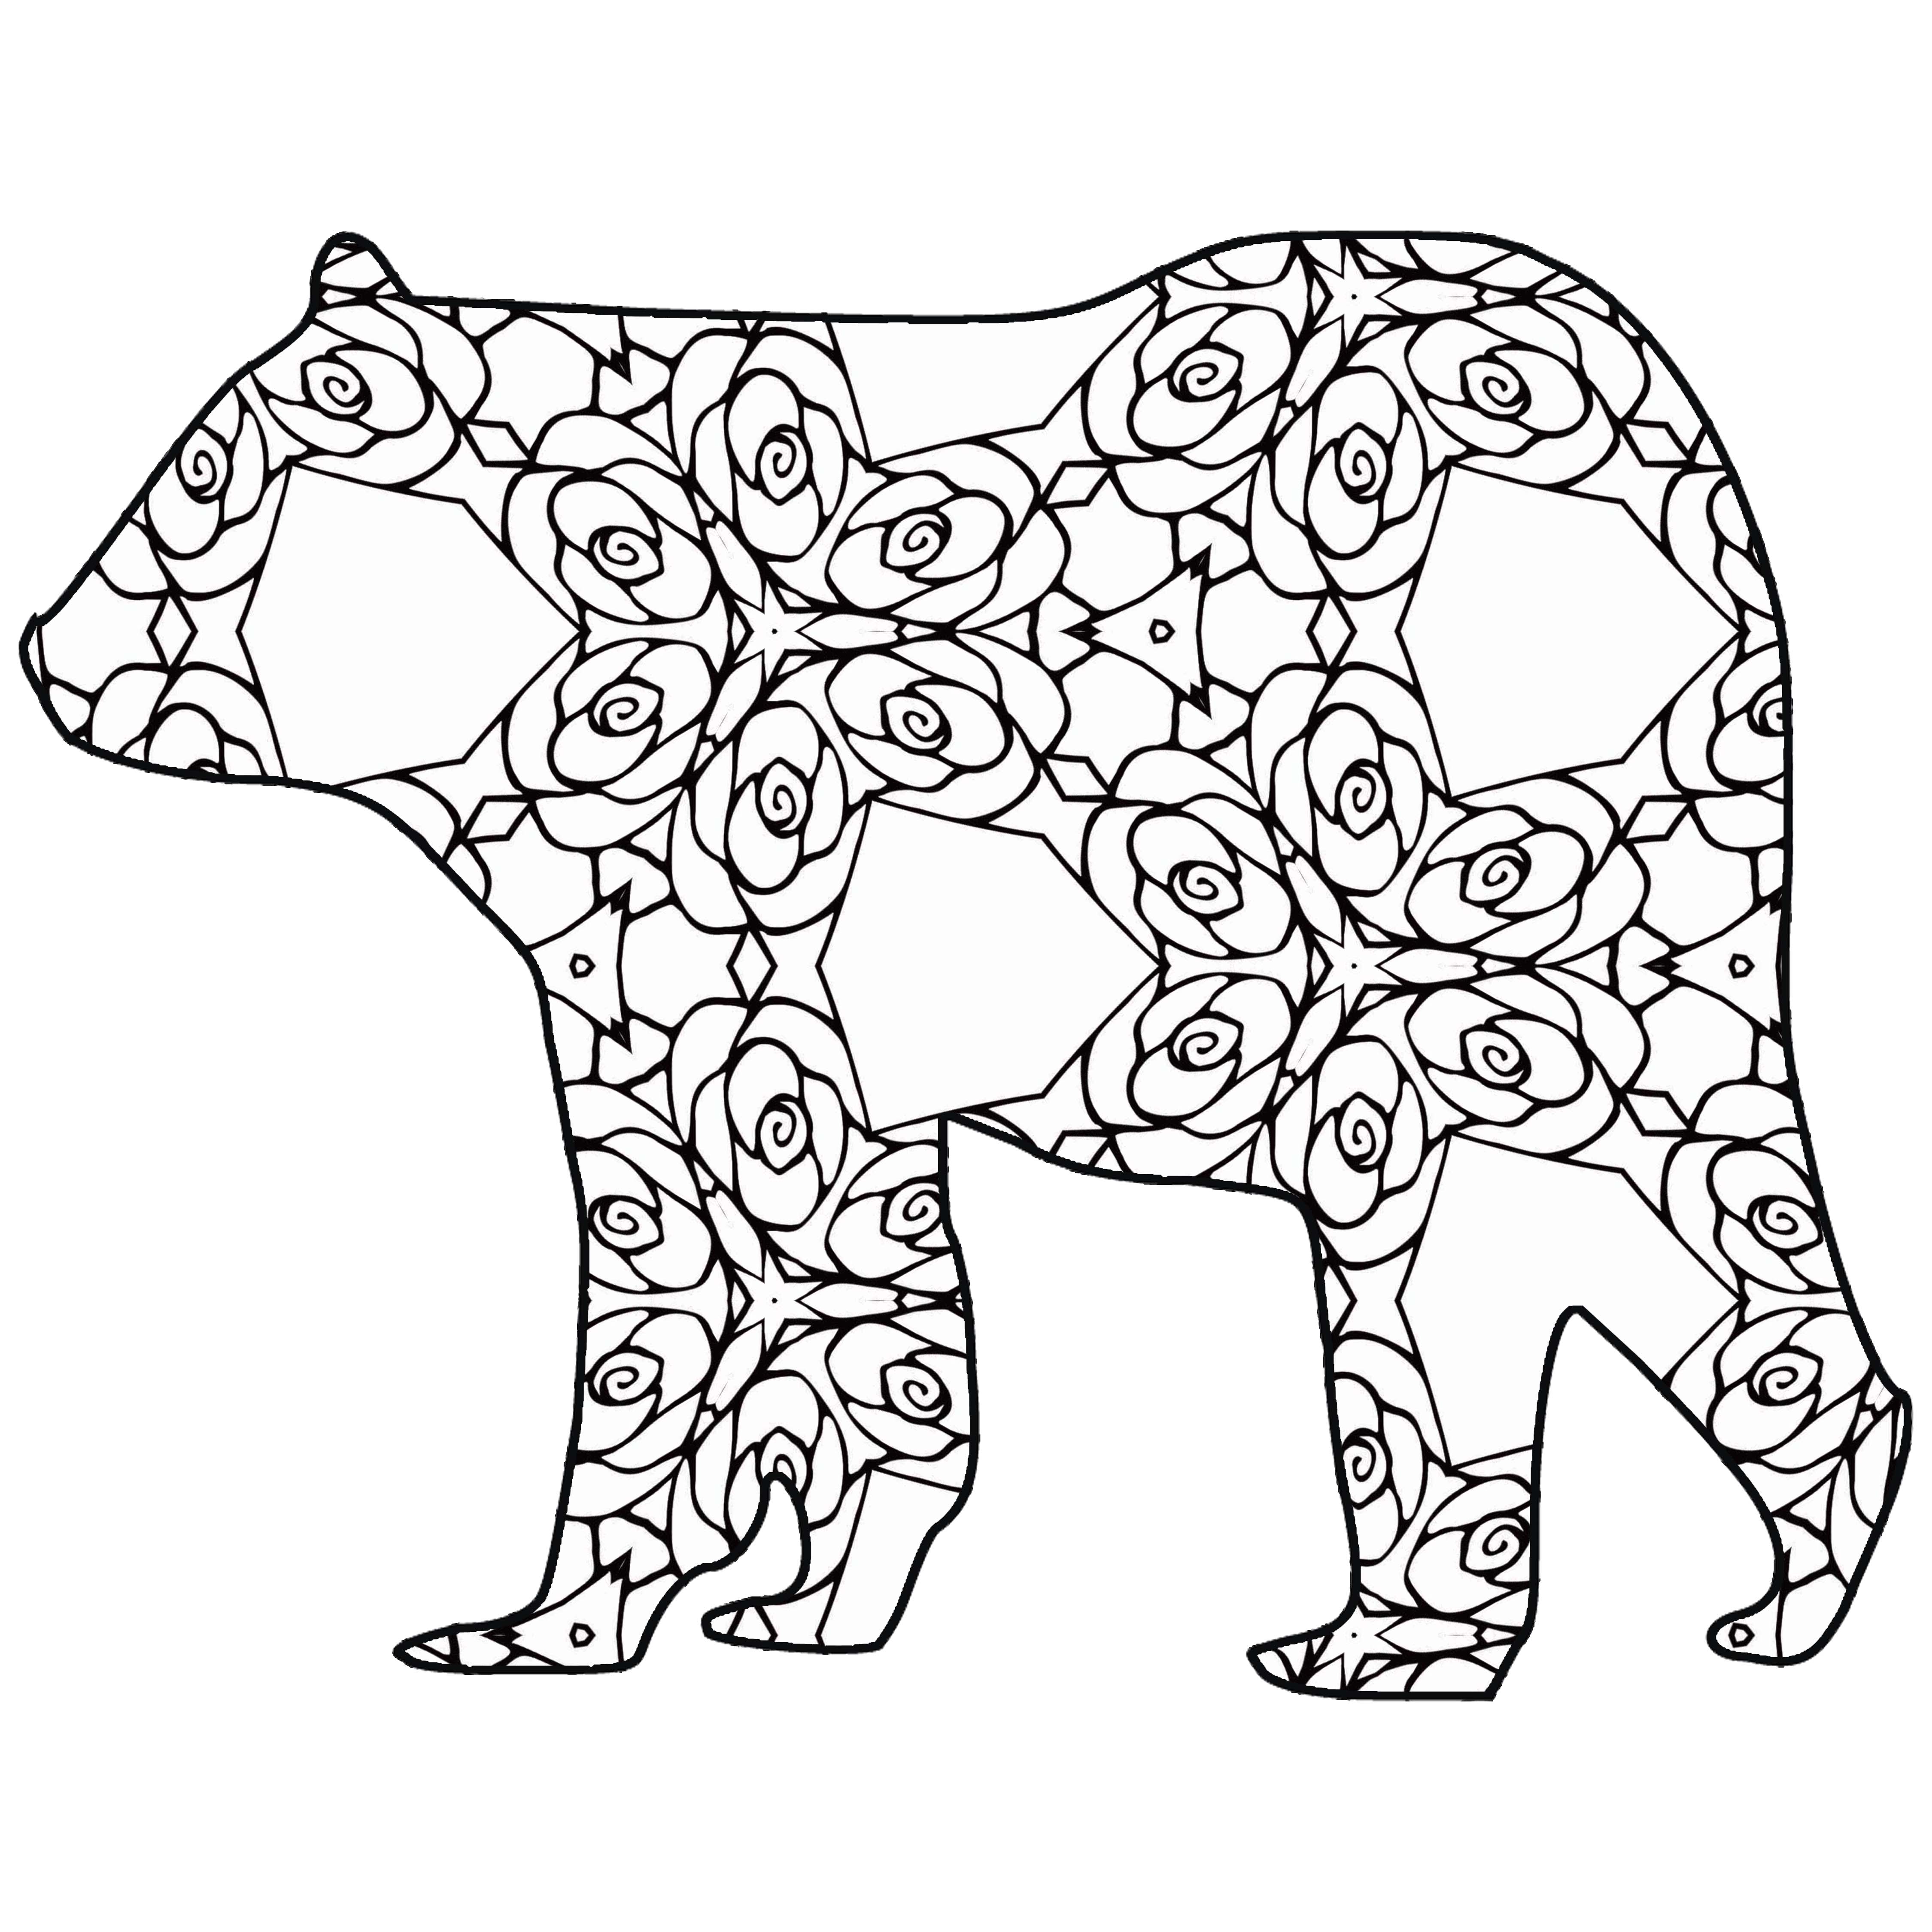 Download 30 Free Printable Geometric Animal Coloring Pages The Cottage Market